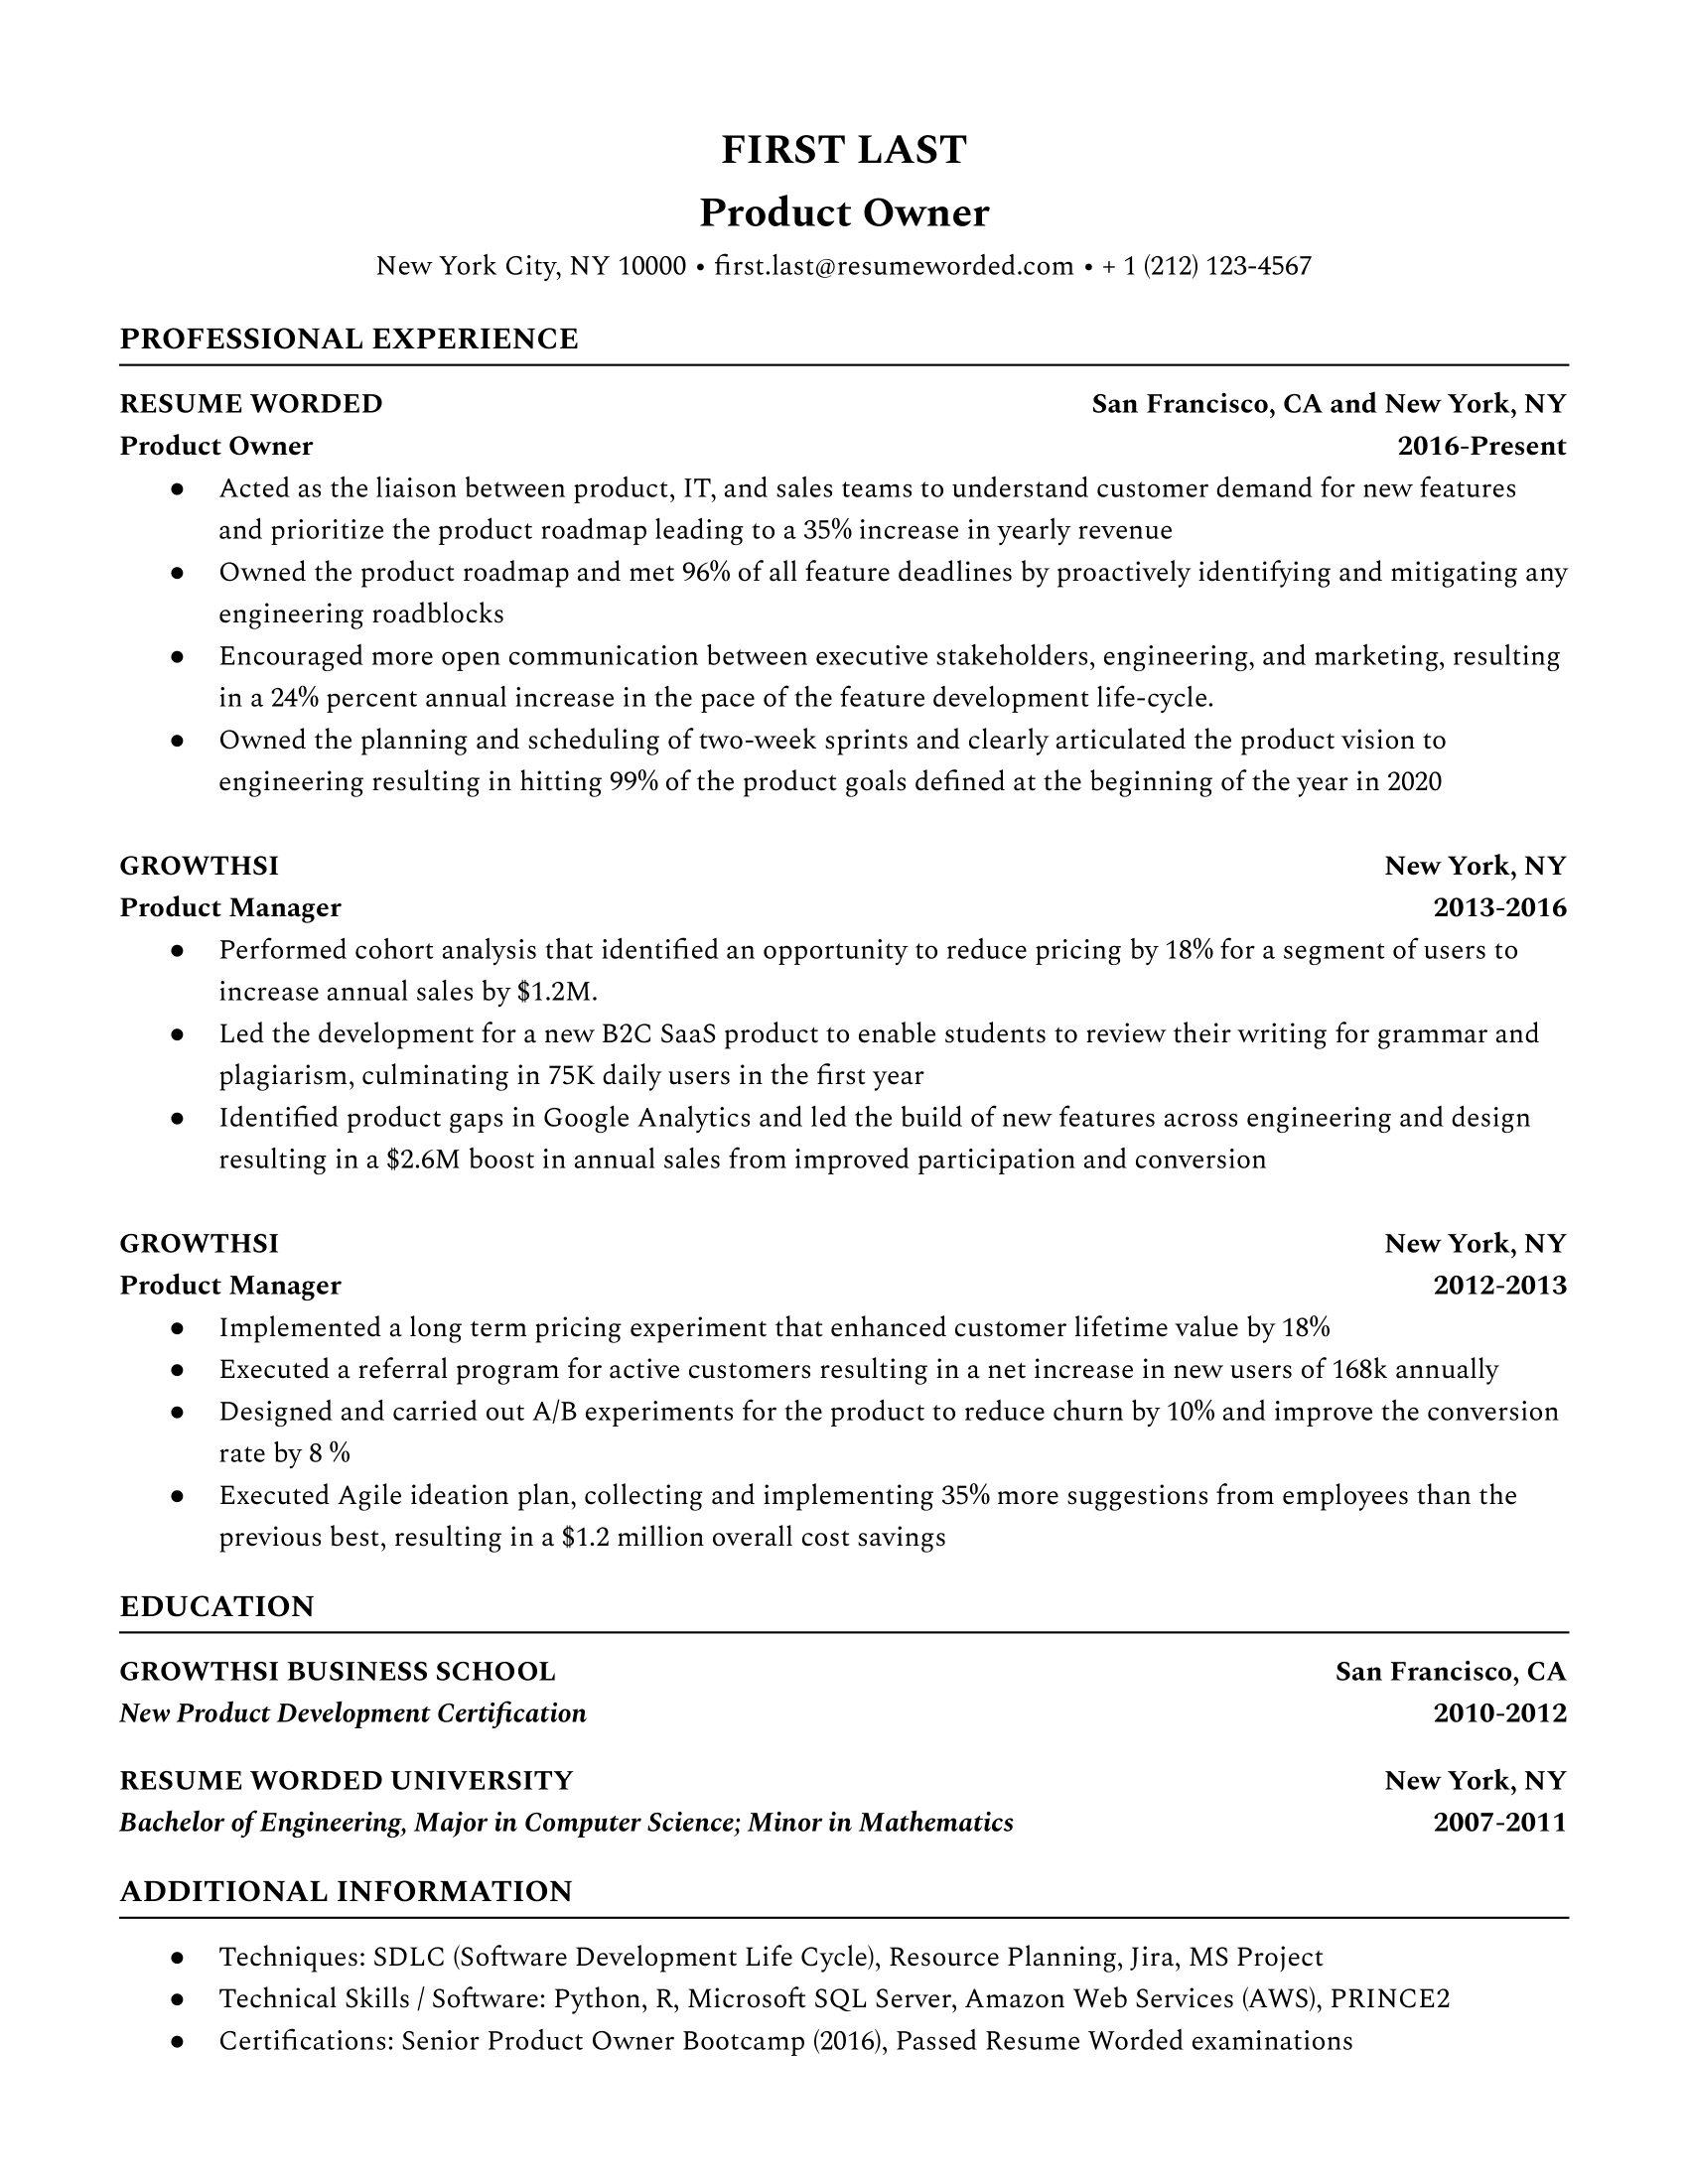 Highlight relevant experience - Real Estate Attorney Resume